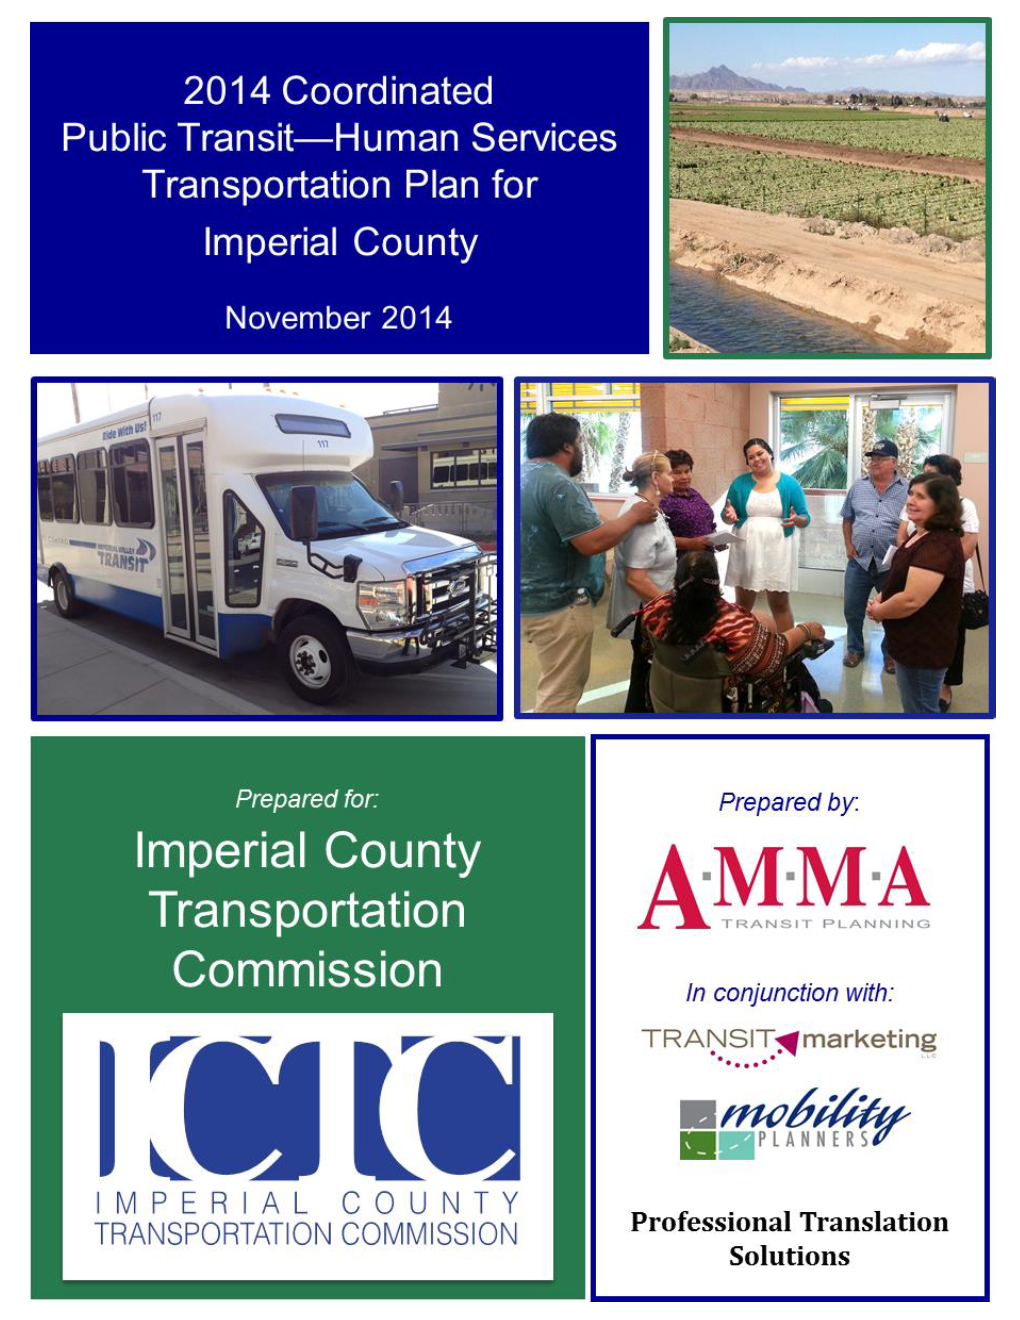 2014 Public Transit—Human Services Transportation Coordination Plan for Imperial County